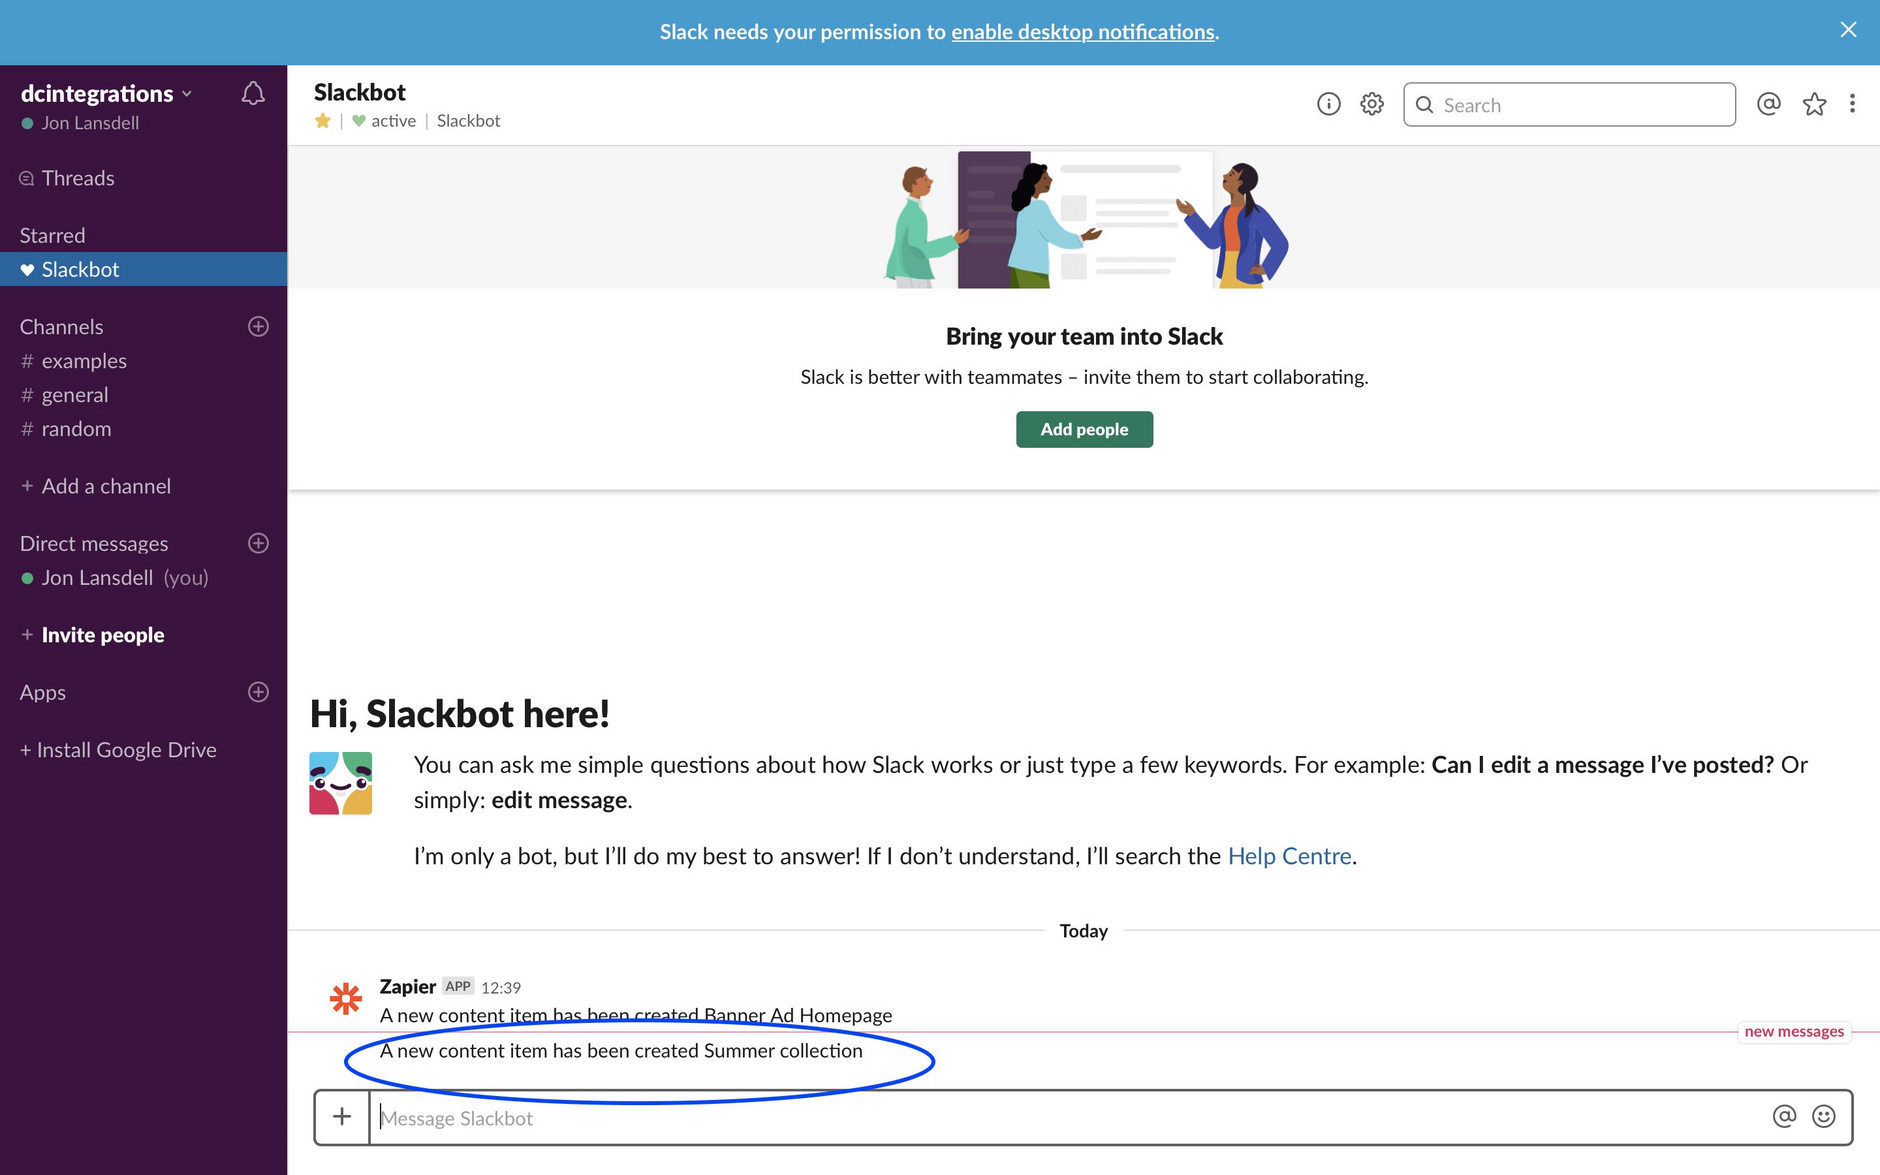 The Zap sends a message to Slack containing the content item name